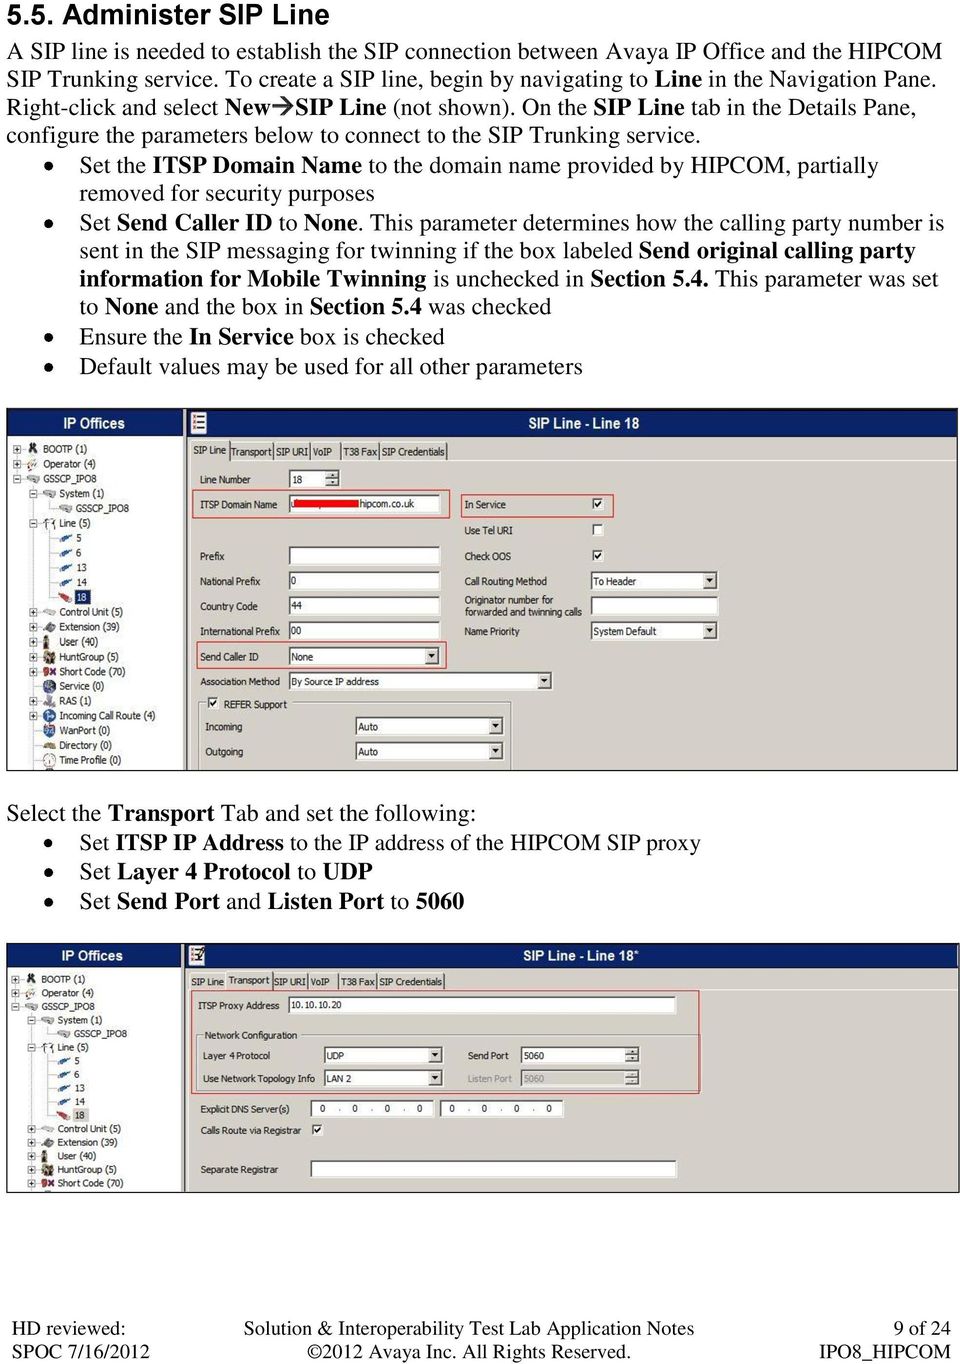 On the SIP Line tab in the Details Pane, configure the parameters below to connect to the SIP Trunking service.